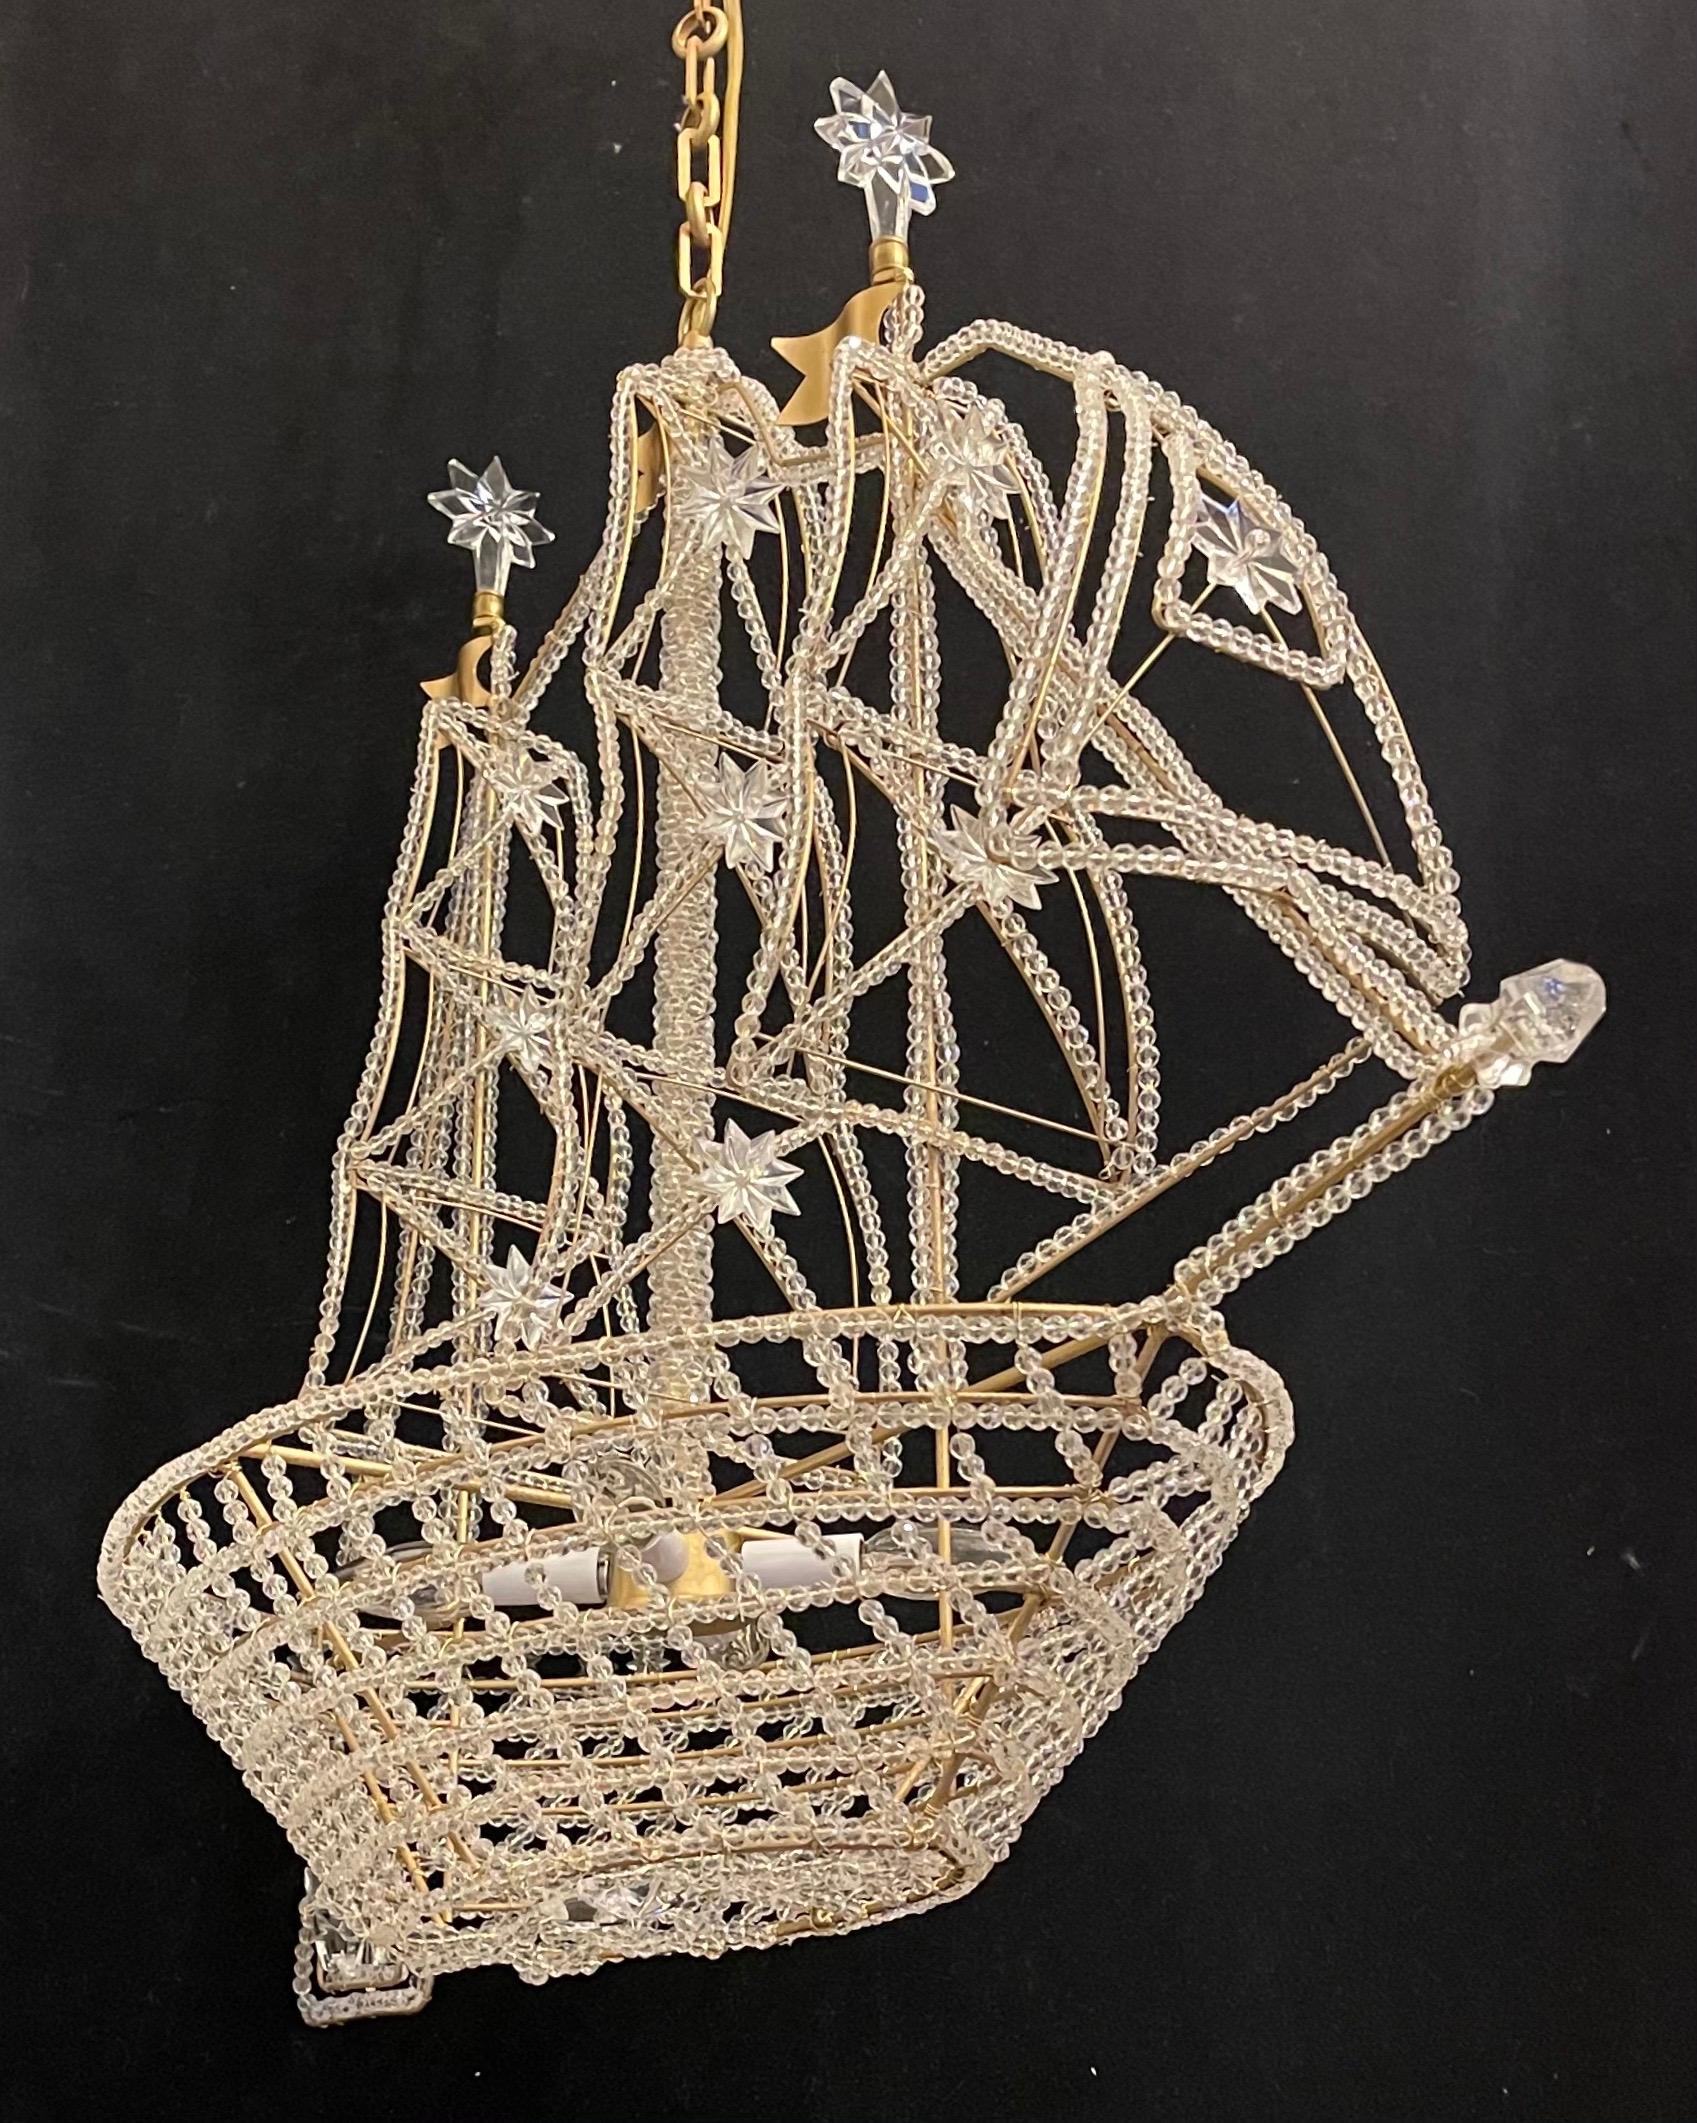 A wonderful boat / ship chandelier that is beautifully detailed with a beaded crystal hull and sails crystal star accents throughout and finished with a rock crystal finial at the bow. Outfitted with 4 internal lights, In the manner of Baguès.
This